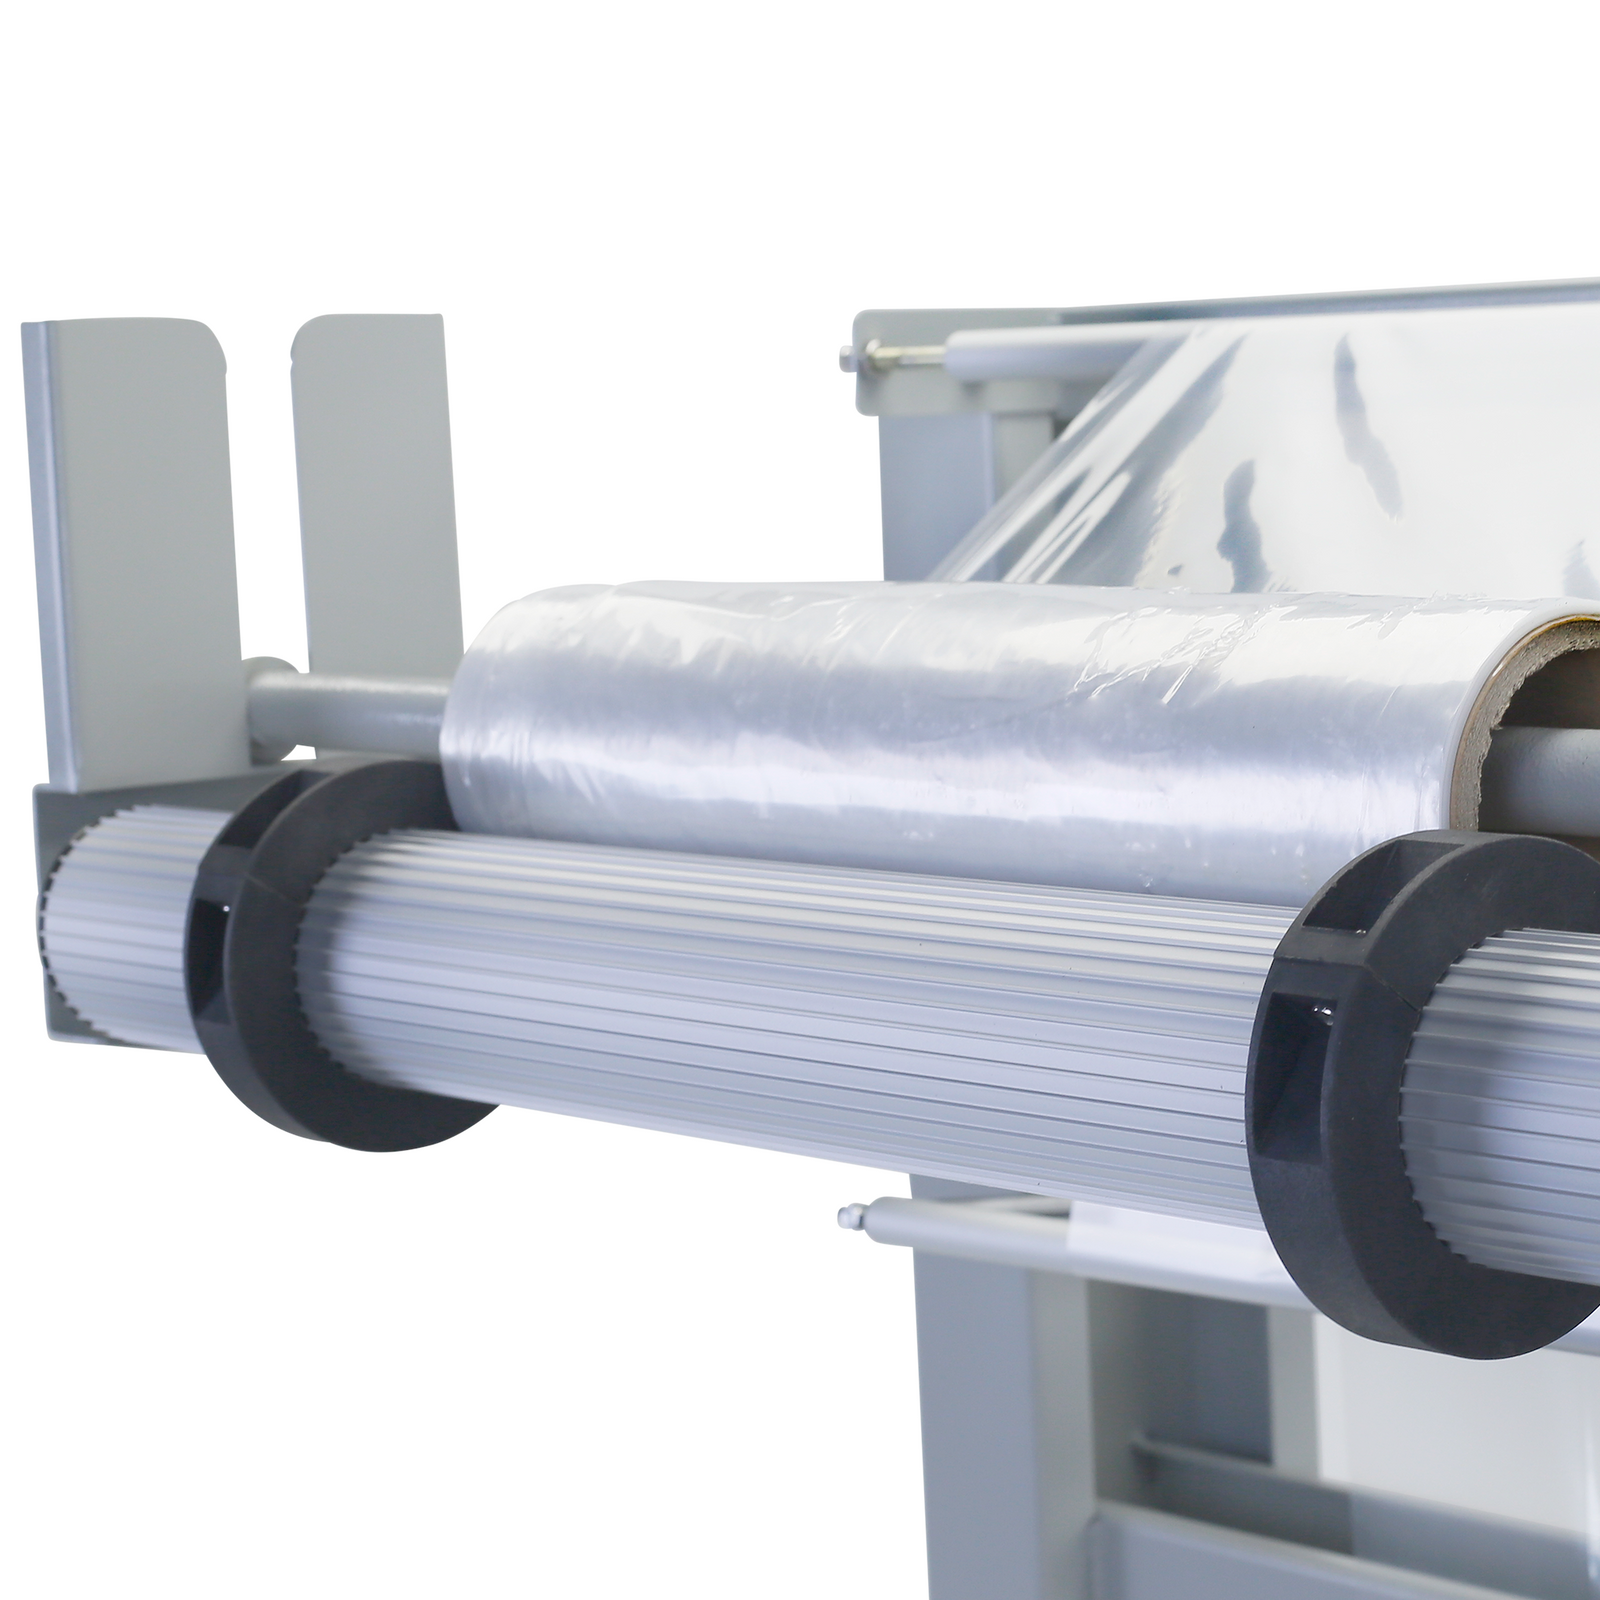 Close up view of the Shrink Film Roll positioned in the JORES TECHNOLOGIES® Sleeve Shrink Film Sealer